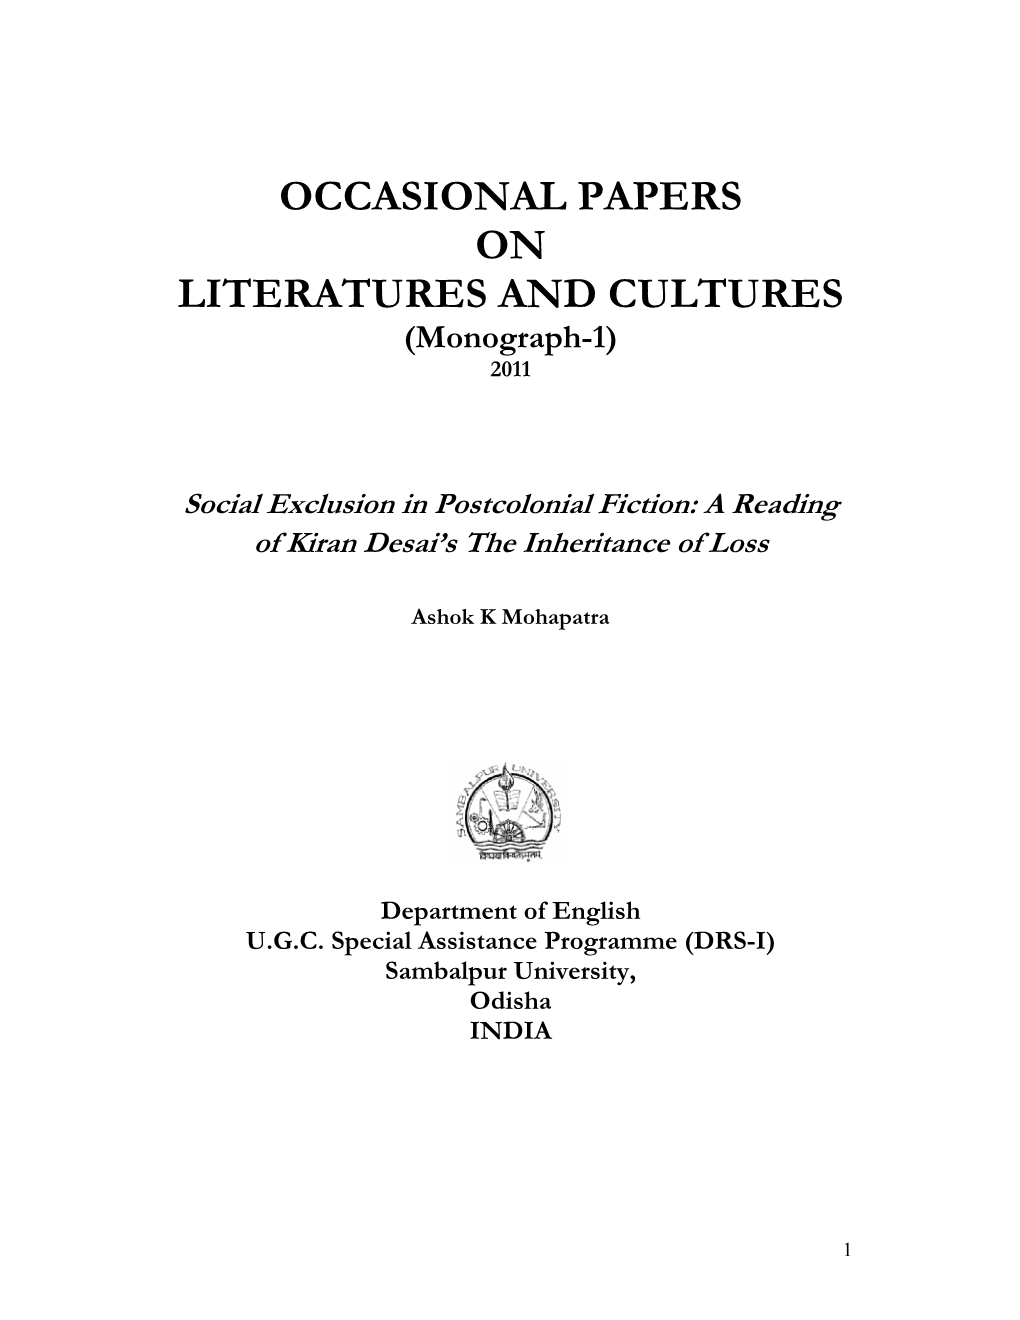 OCCASIONAL PAPERS on LITERATURES and CULTURES (Monograph-1) 2011